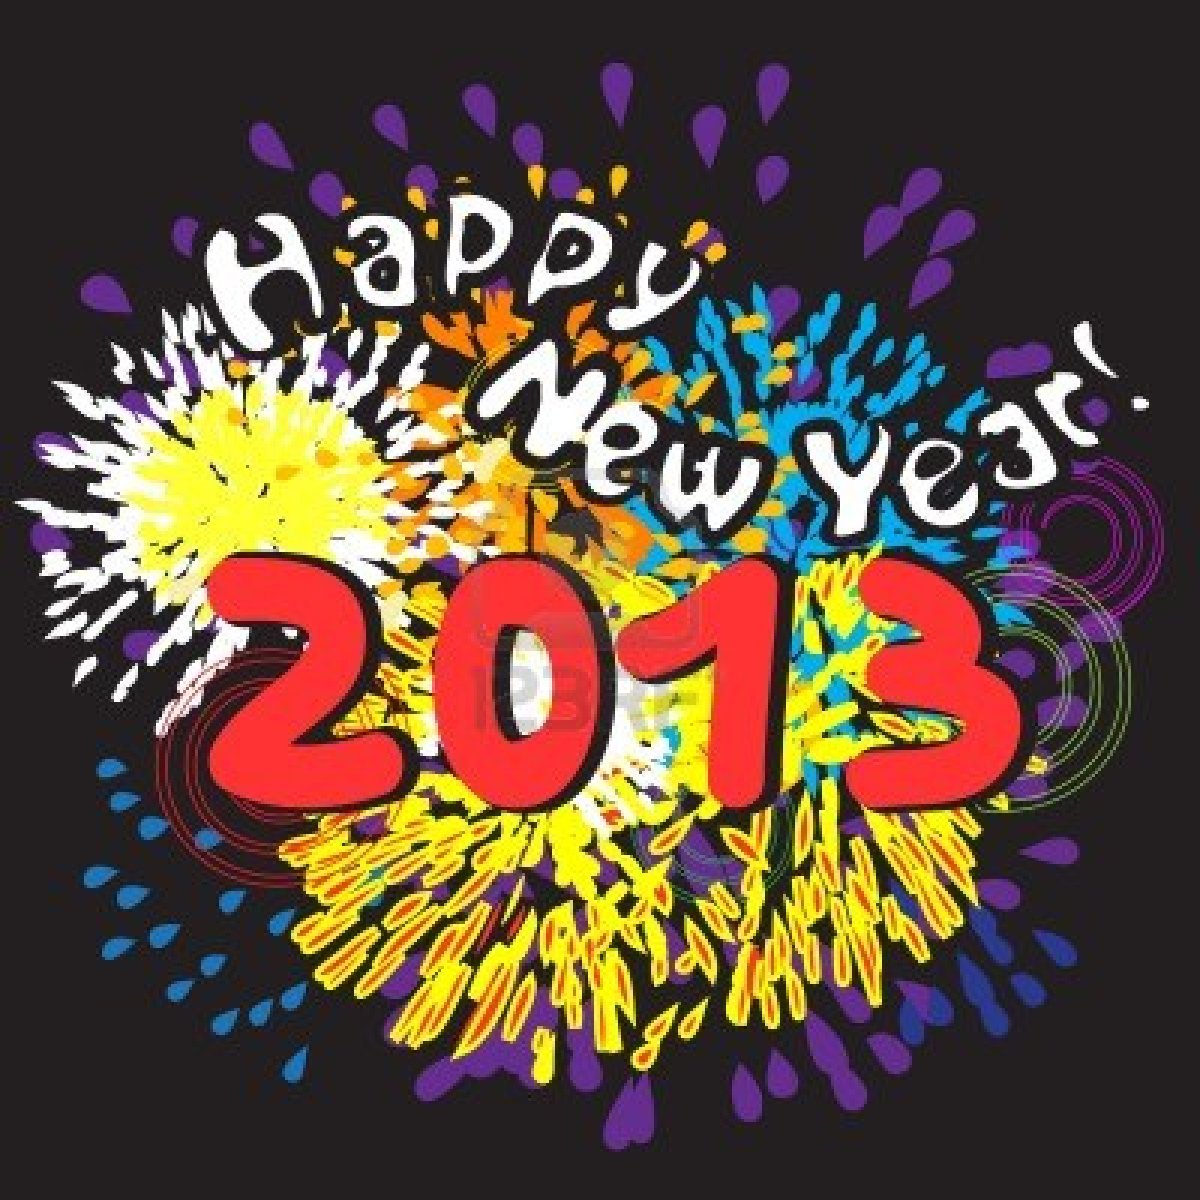 14976718-happy-new-year-2013-greetings-card-with-fireworks-over-black-night-background.jpg